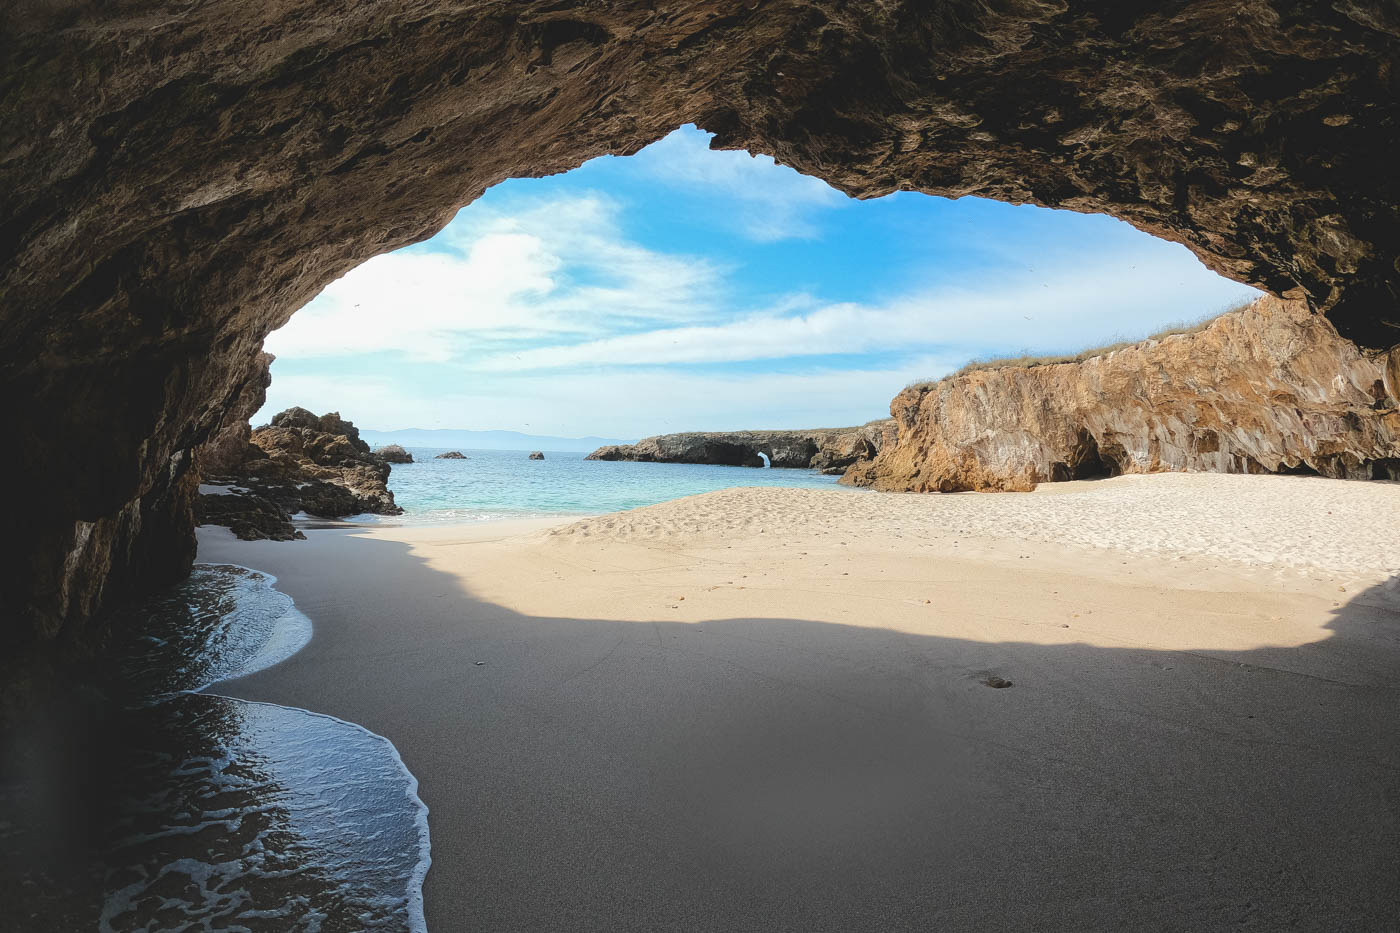 Arch way of rock with a beach leading to the ocean.